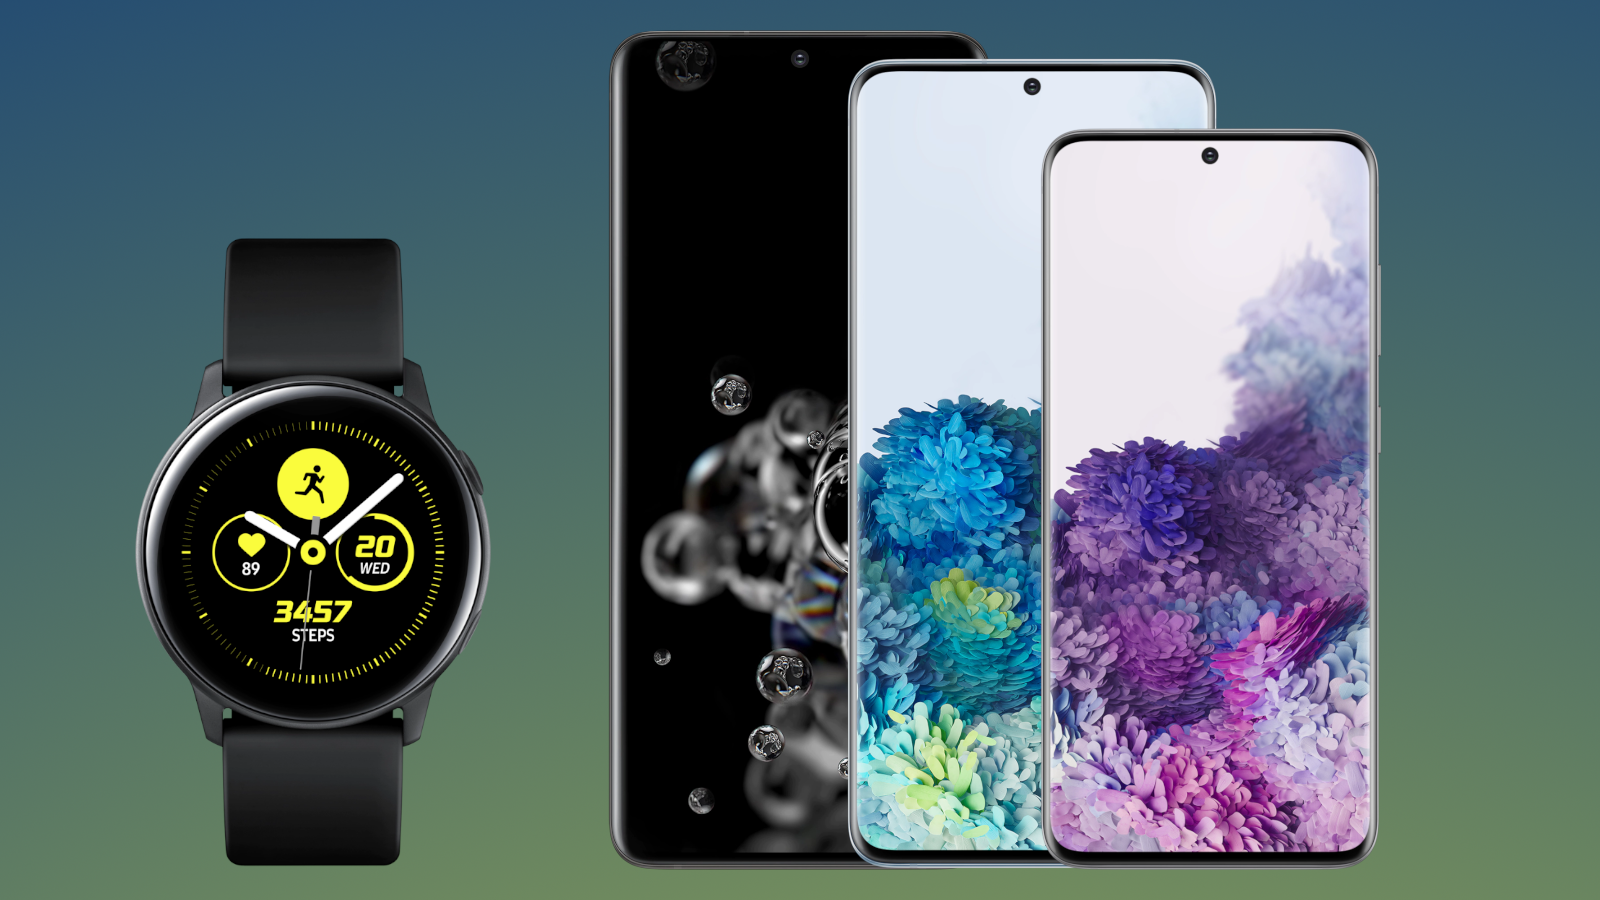 Buy a Galaxy S20 and get a free Samsung Galaxy Watch Active 2